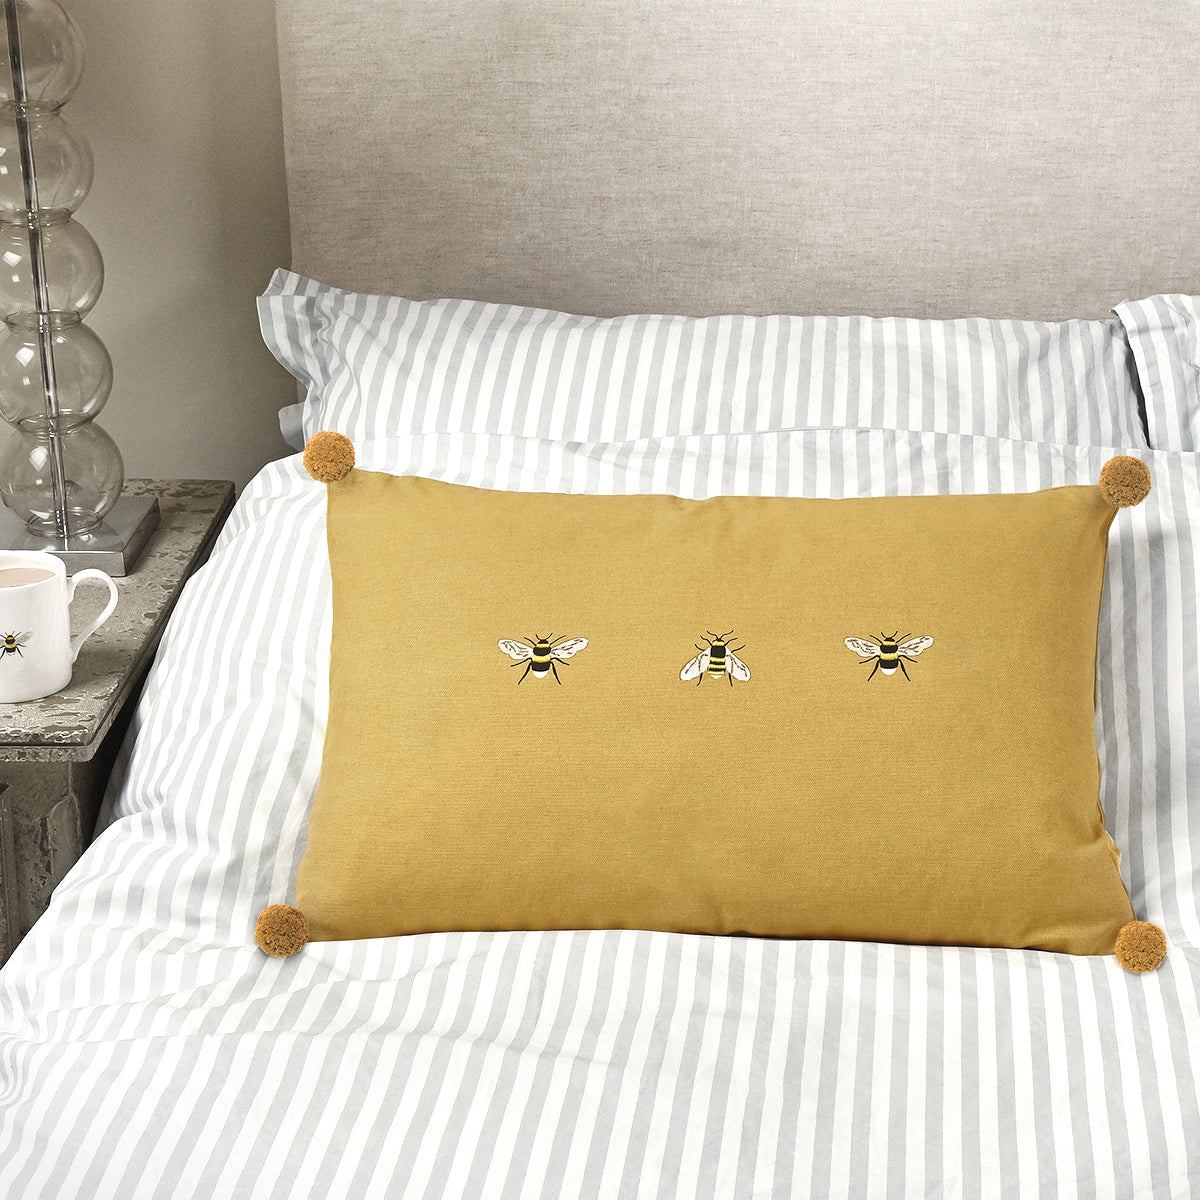 Bees Embroidered Cushion